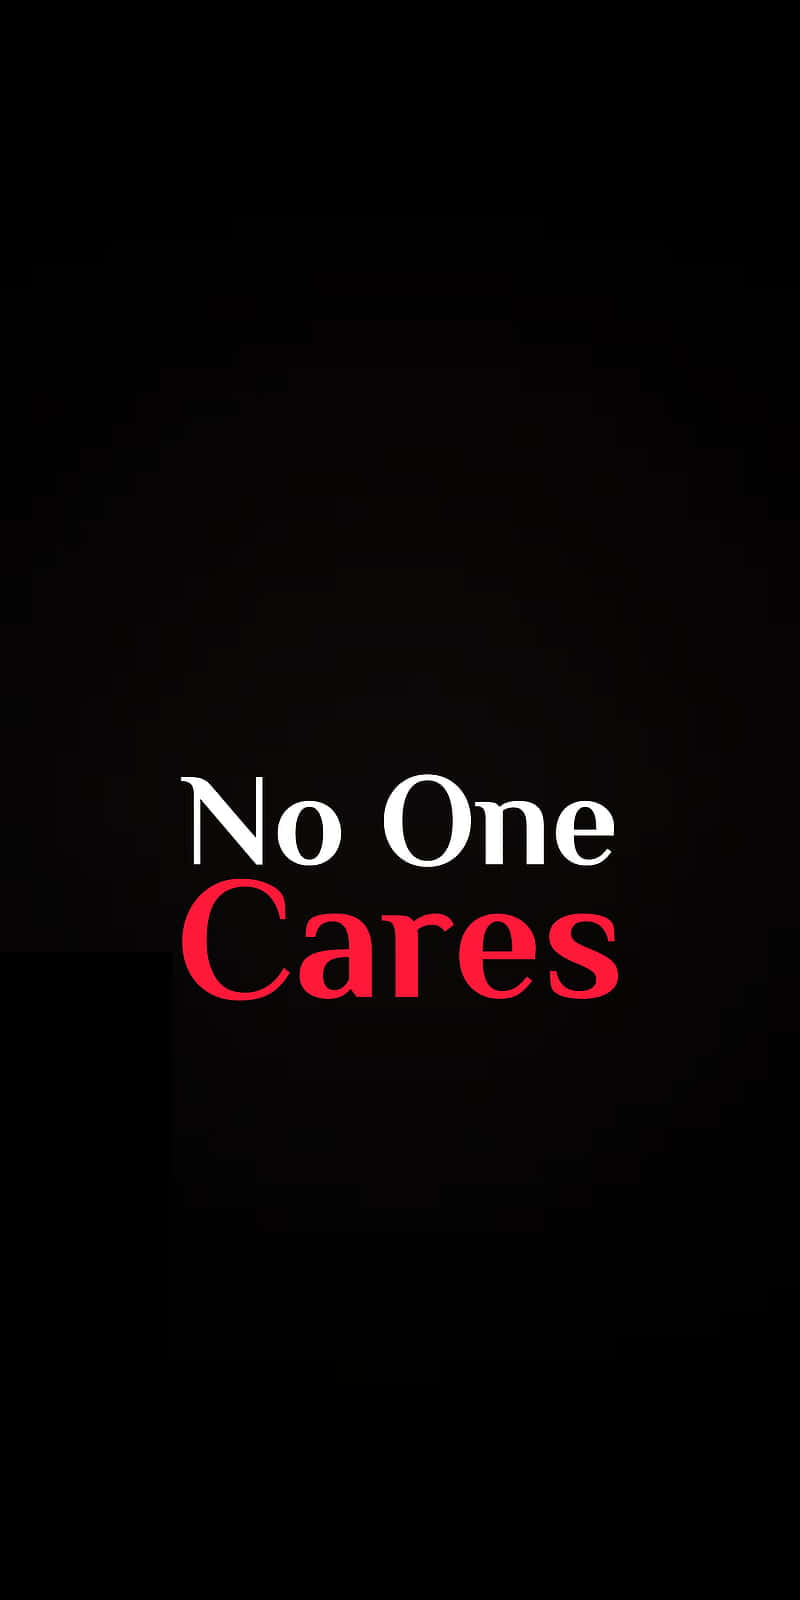 No One Cares - A Black Background With Red Text